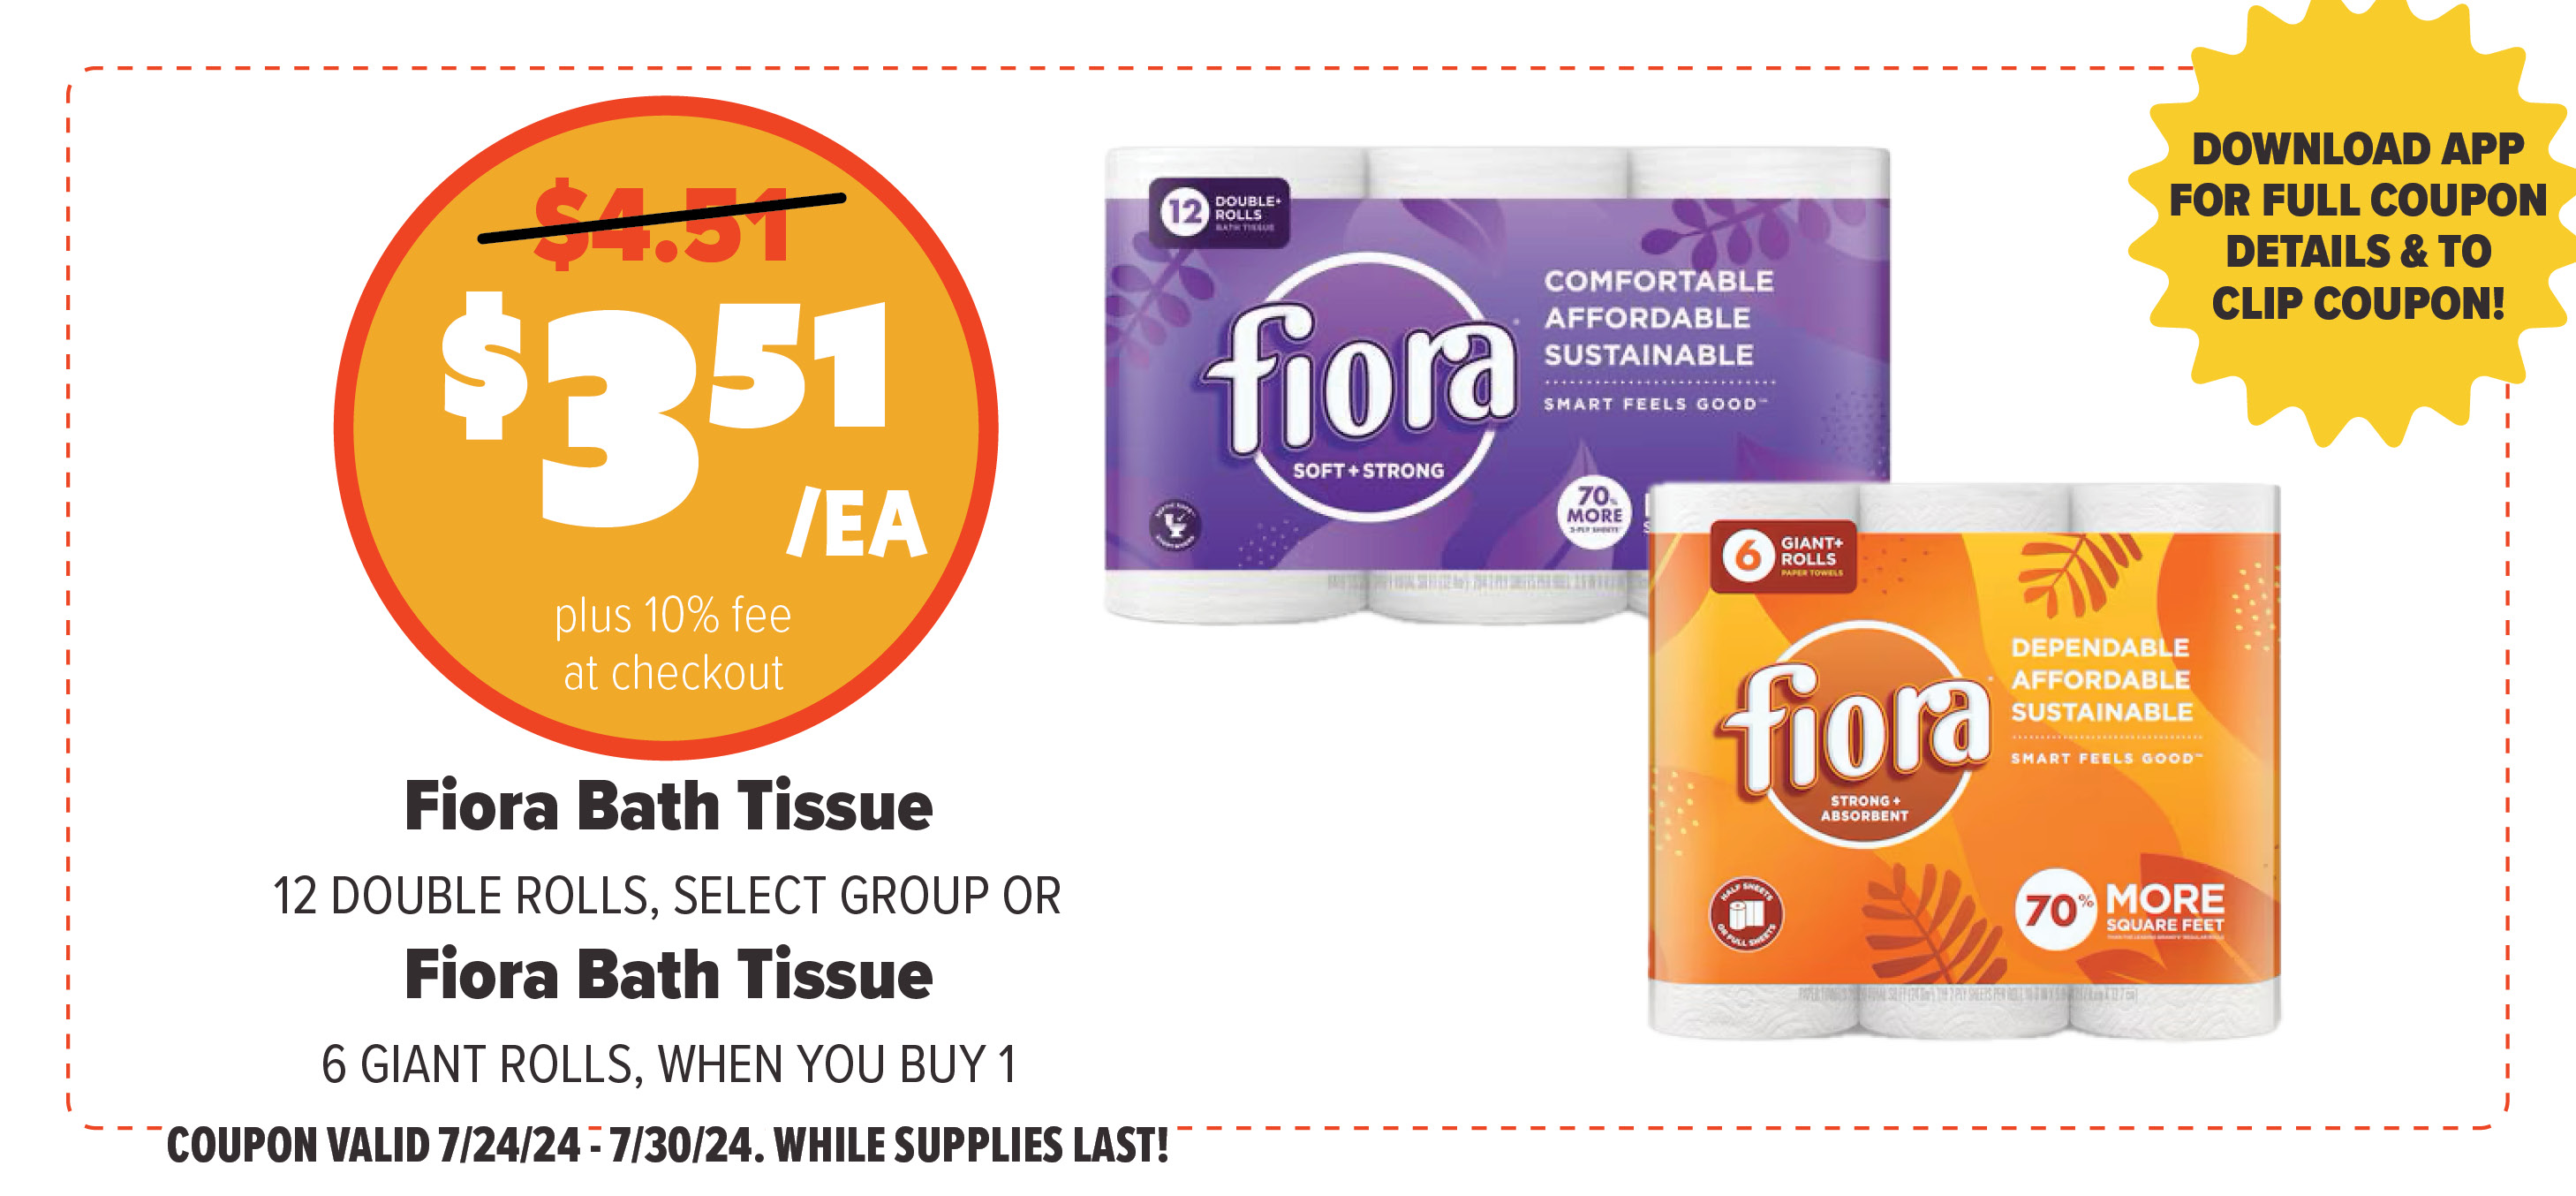 Digital App Deal of the Week, $3.51 Each plus 10% fee at checkout: Fiora Bath Tissue 12 DOUBLE ROLLS, SELECT GROUP OR Fiora Bath Tissue 6 GIANT ROLLS, WHEN YOU BUY 1 COUPON VALID 7/24/24 = 7/30/24. WHILE SUPPLIES LAST!